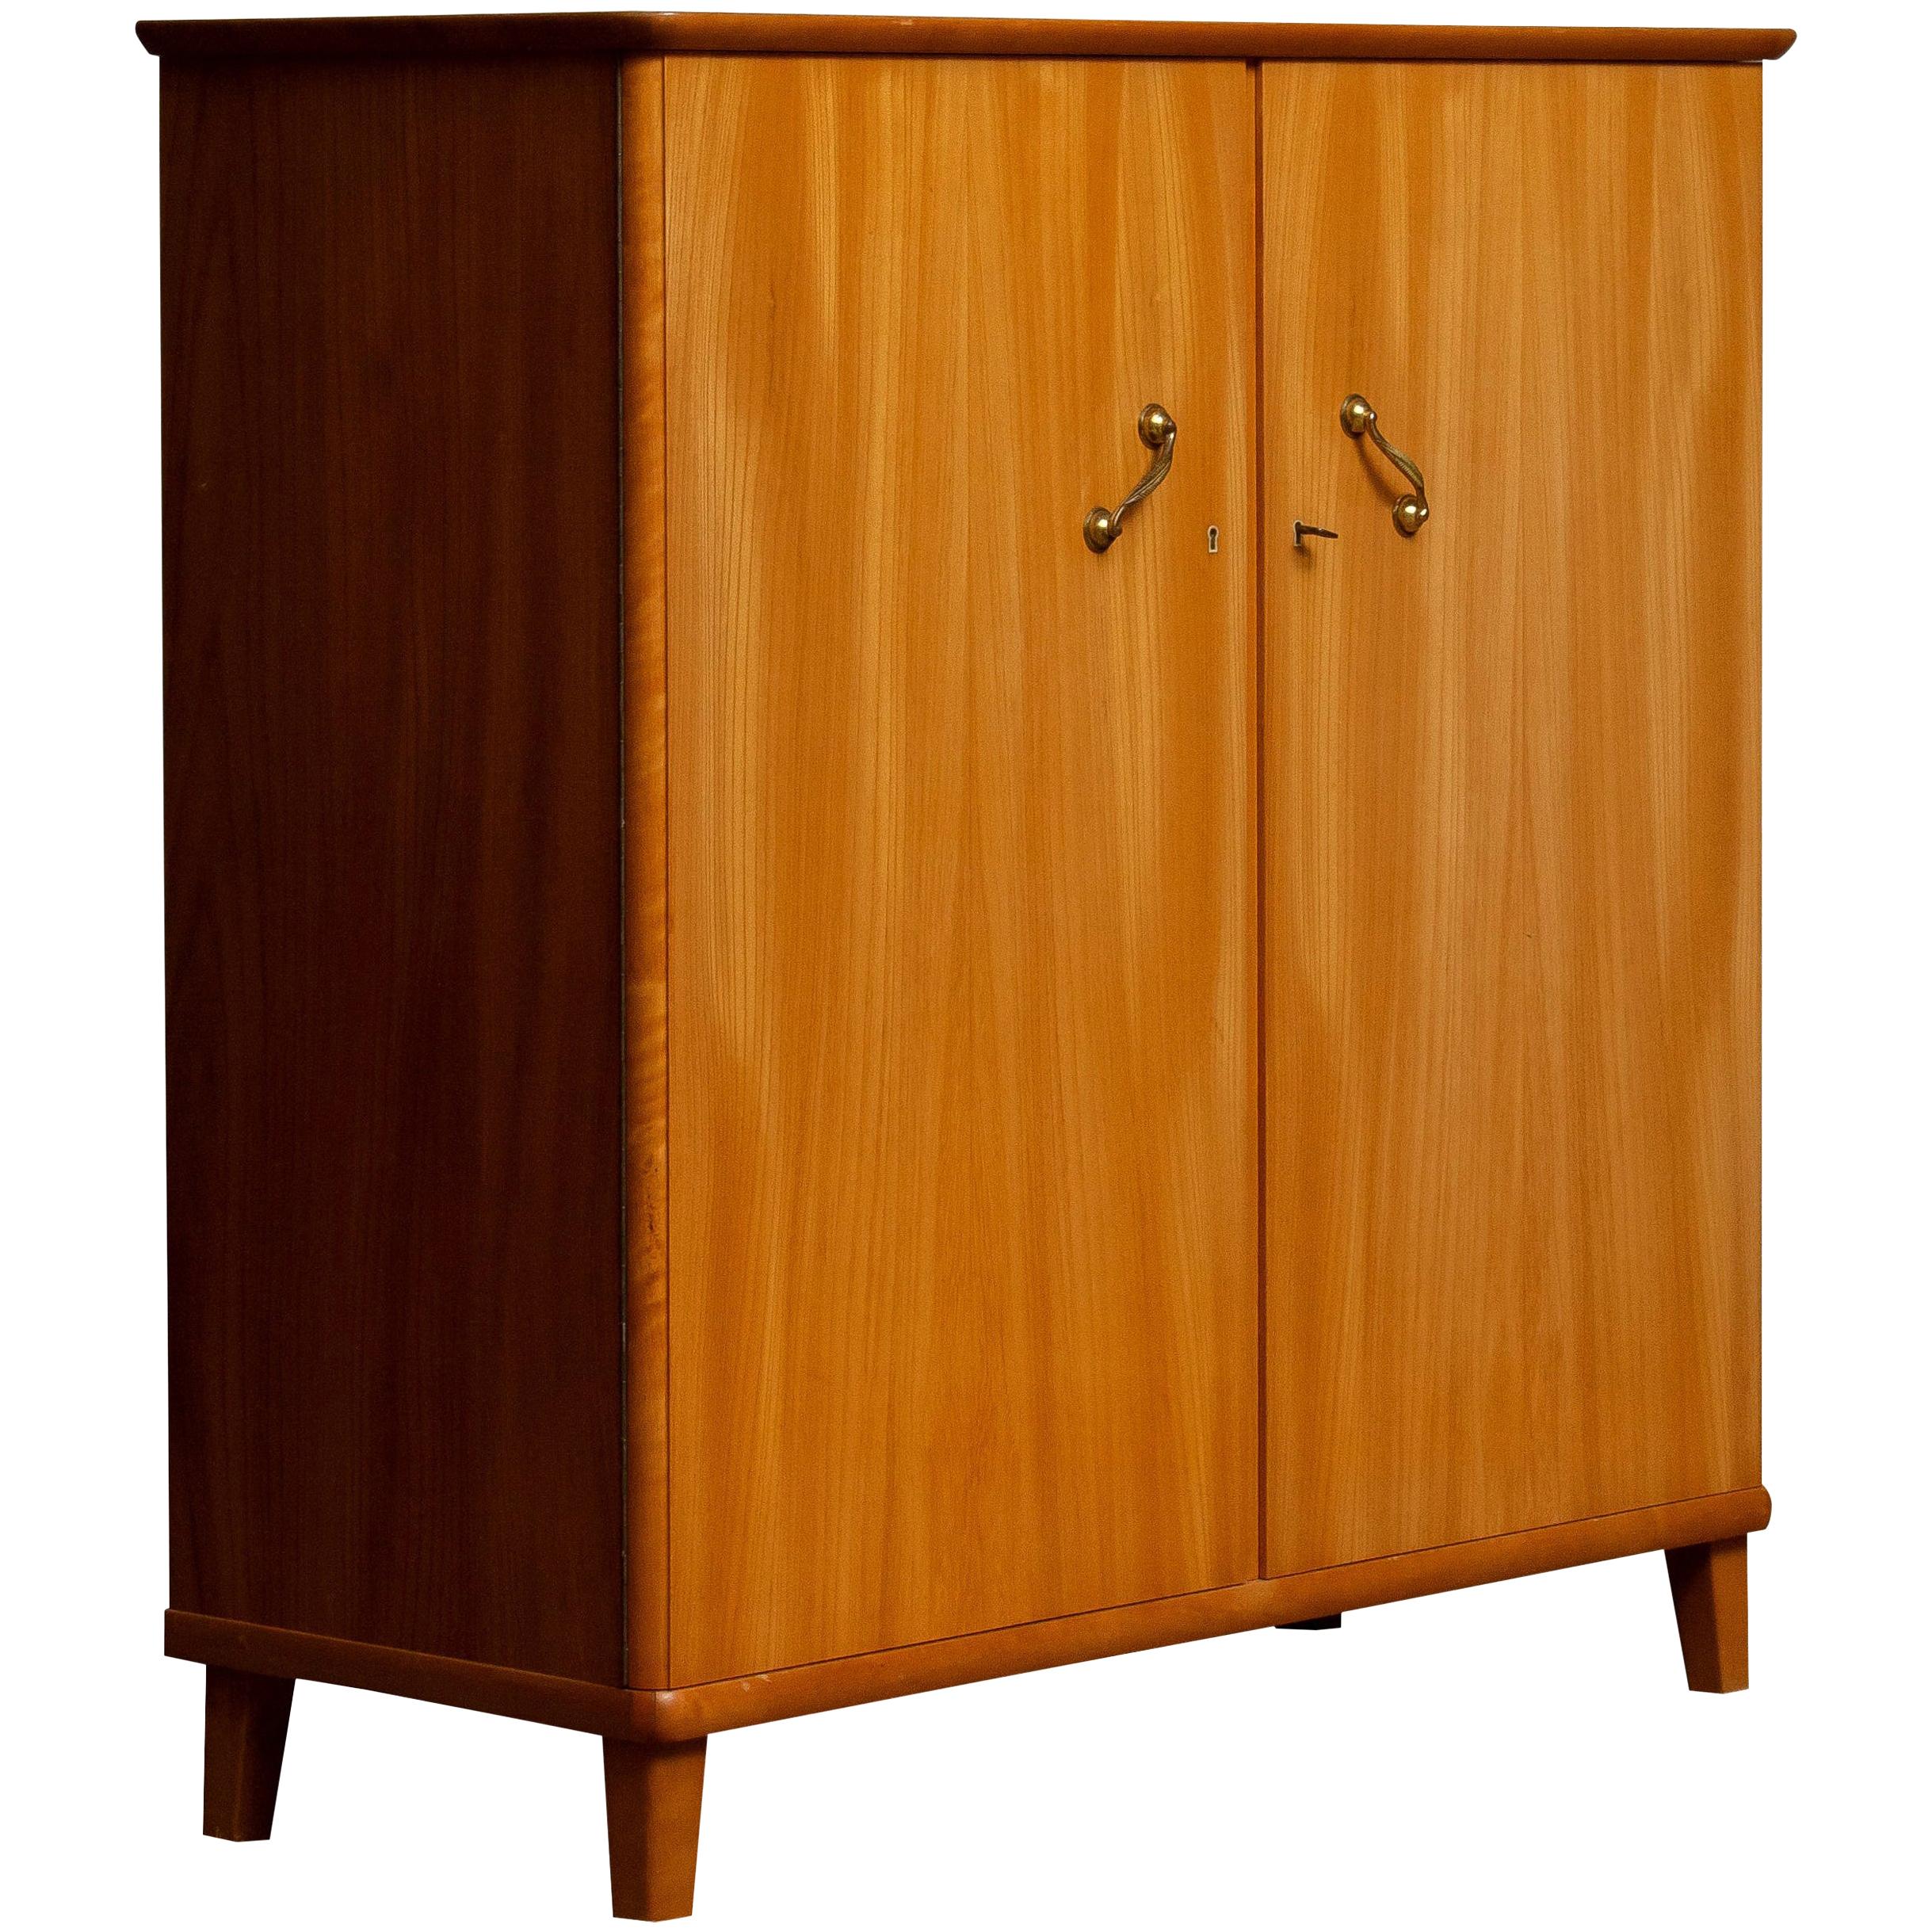 Beautiful cabinet in elm made in Tibro, Sweden.

This cupboard is made up of two front swing doors that can be locked with on the right side two internal drawers and two in height-adjustable shelves. There are also two adjustable shelves on the